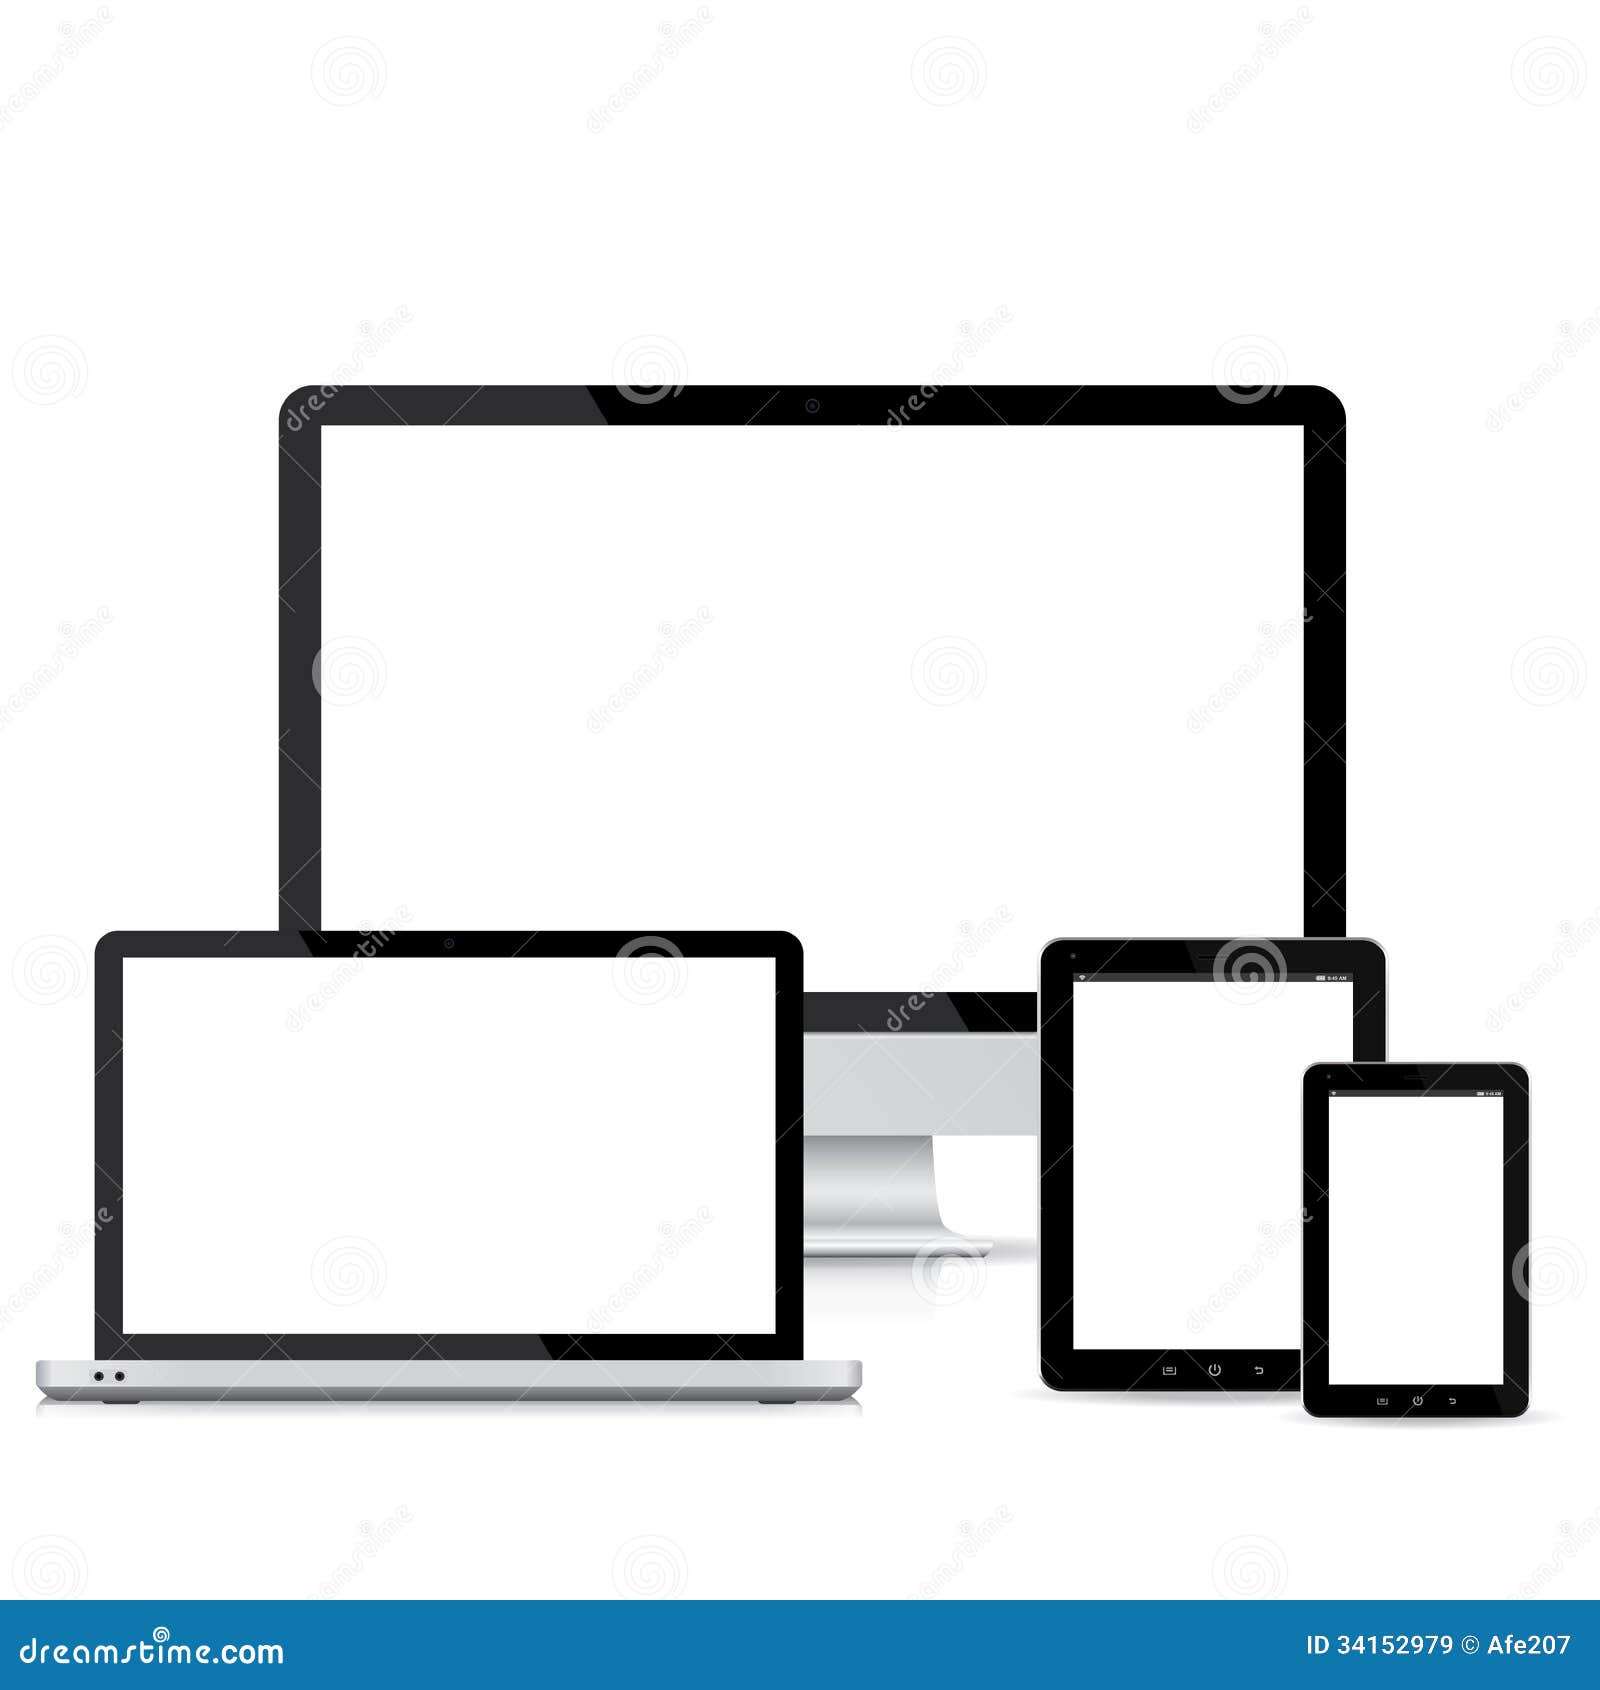 Download Popular Full Responsive Web Design Electronic Devices ...